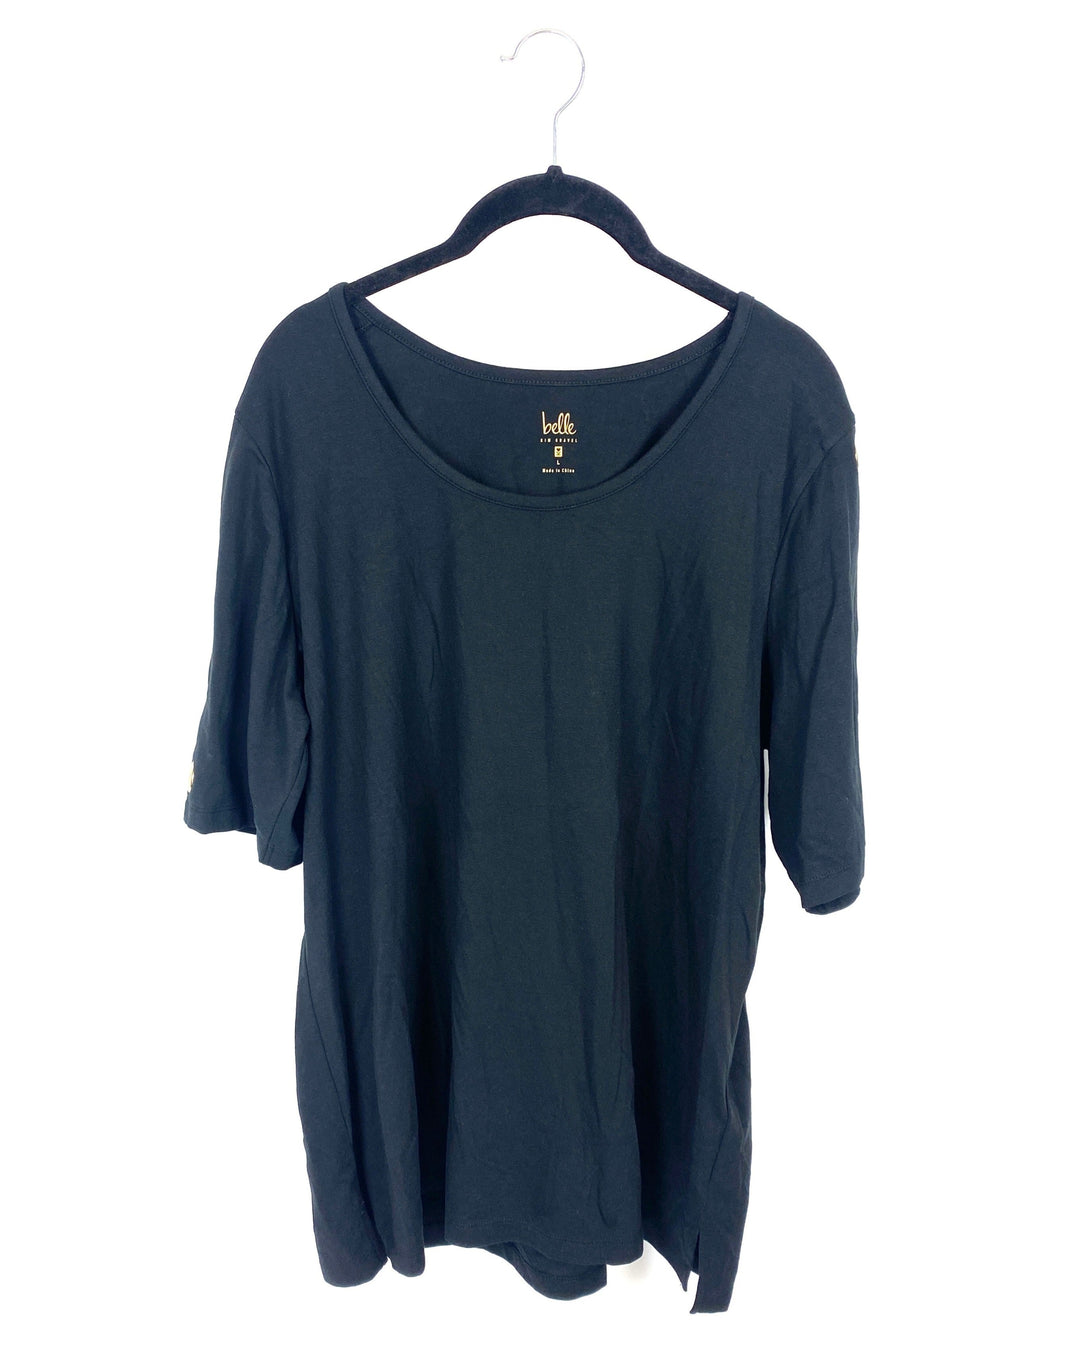 Black Scoop Neck Top - Large/Extra Large